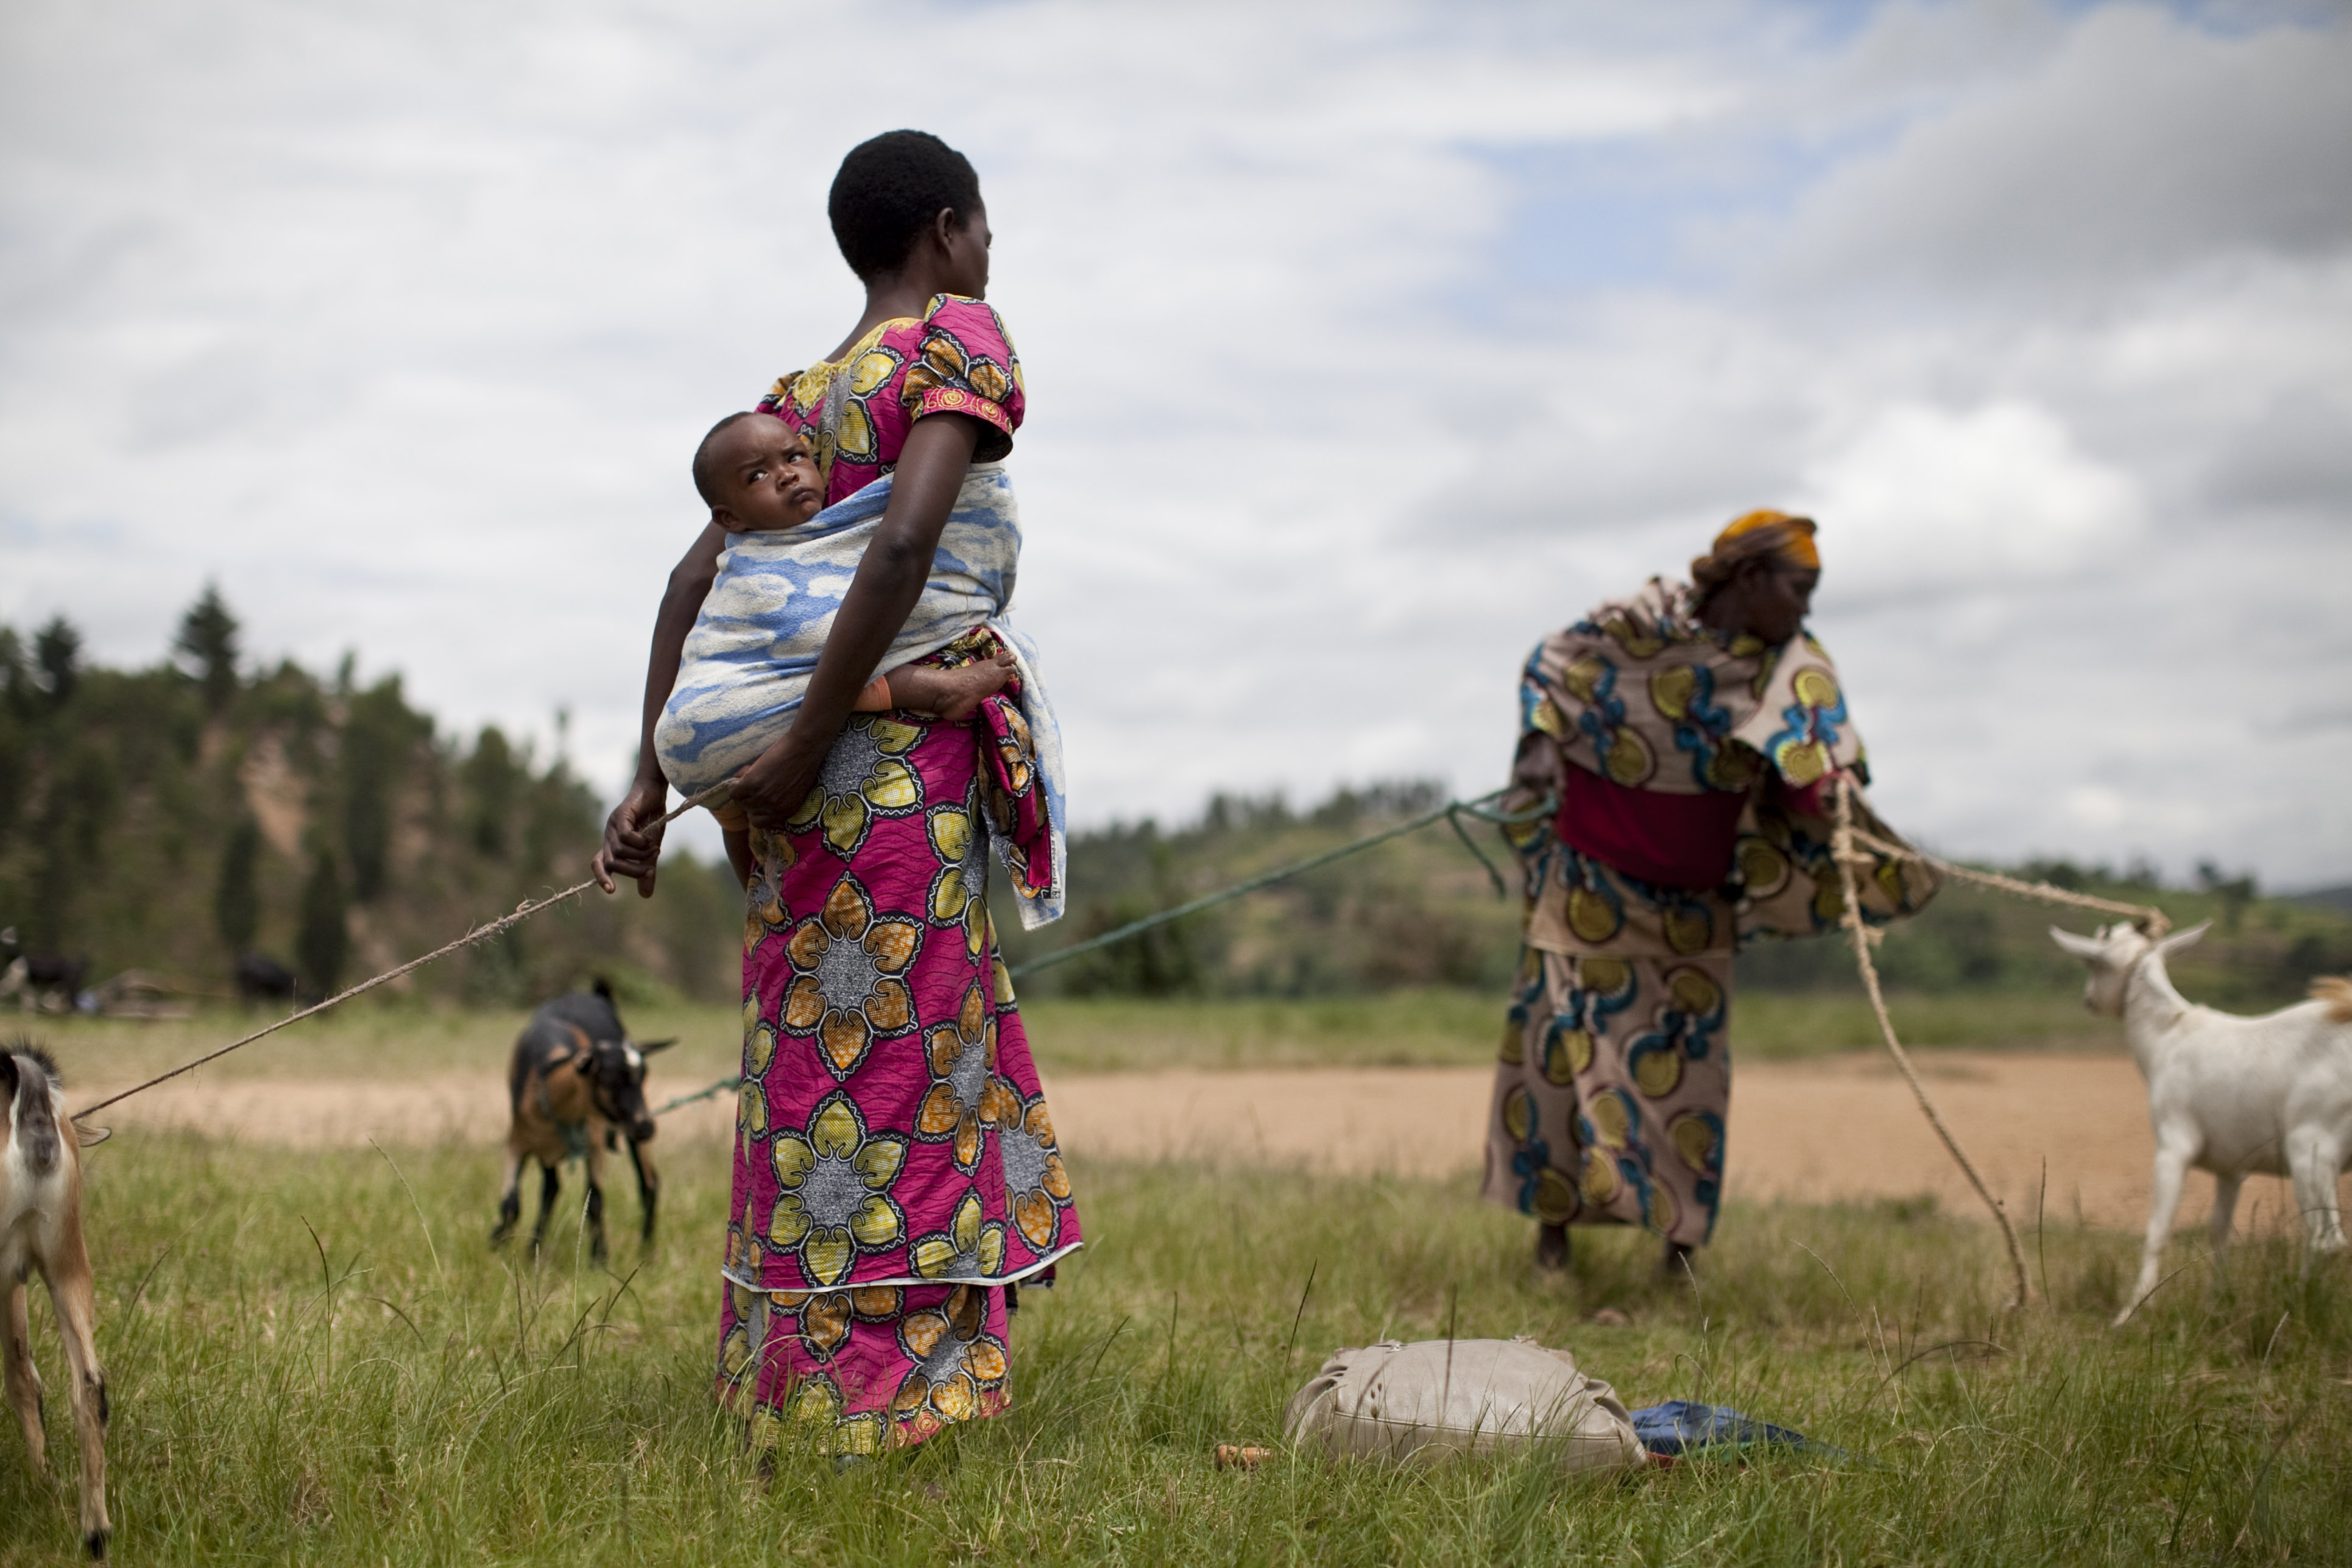 Therese Umuhire, 35, with her son Alfred tied to her back, holds onto the goat she bought at a livestock fair on Tuesday, May 6, 2014, in Cyanika, Rwanda. The fair is one of many livelihoods initiatives between Green Mountain Coffee Roasters and Catholic Relief Services to help Rwanda's coffee growers thrive. The goat will provide Umuhire with organic manure and -- eventually -- baby goats that can be sold.